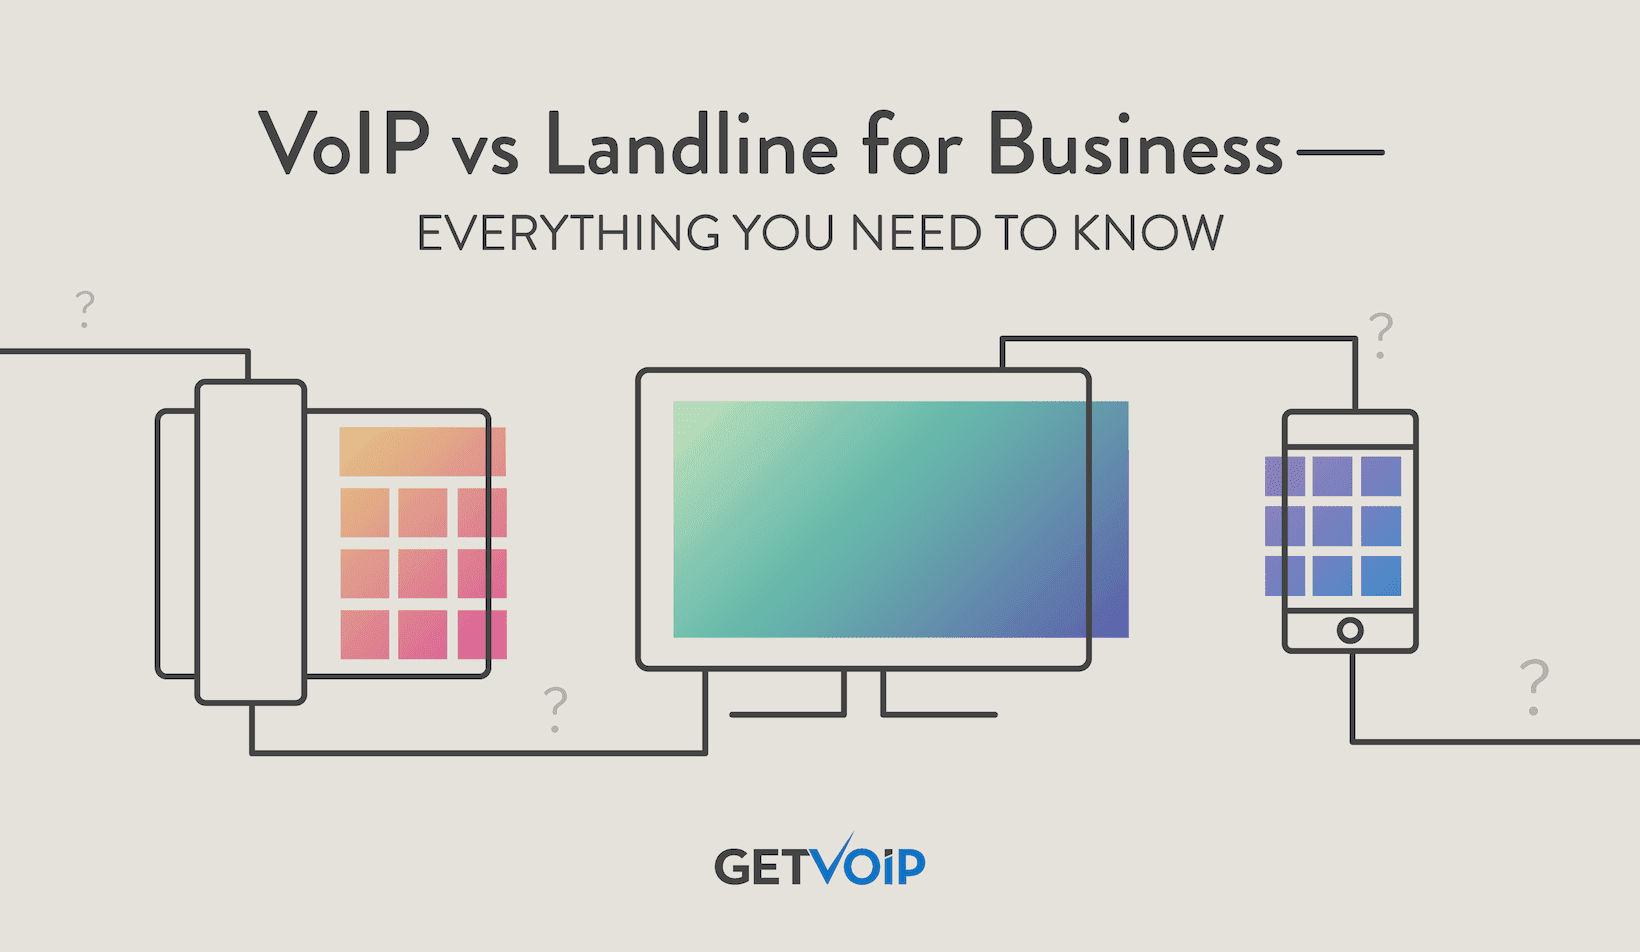 VoIP vs Landline for Business – Everything You Need to Know